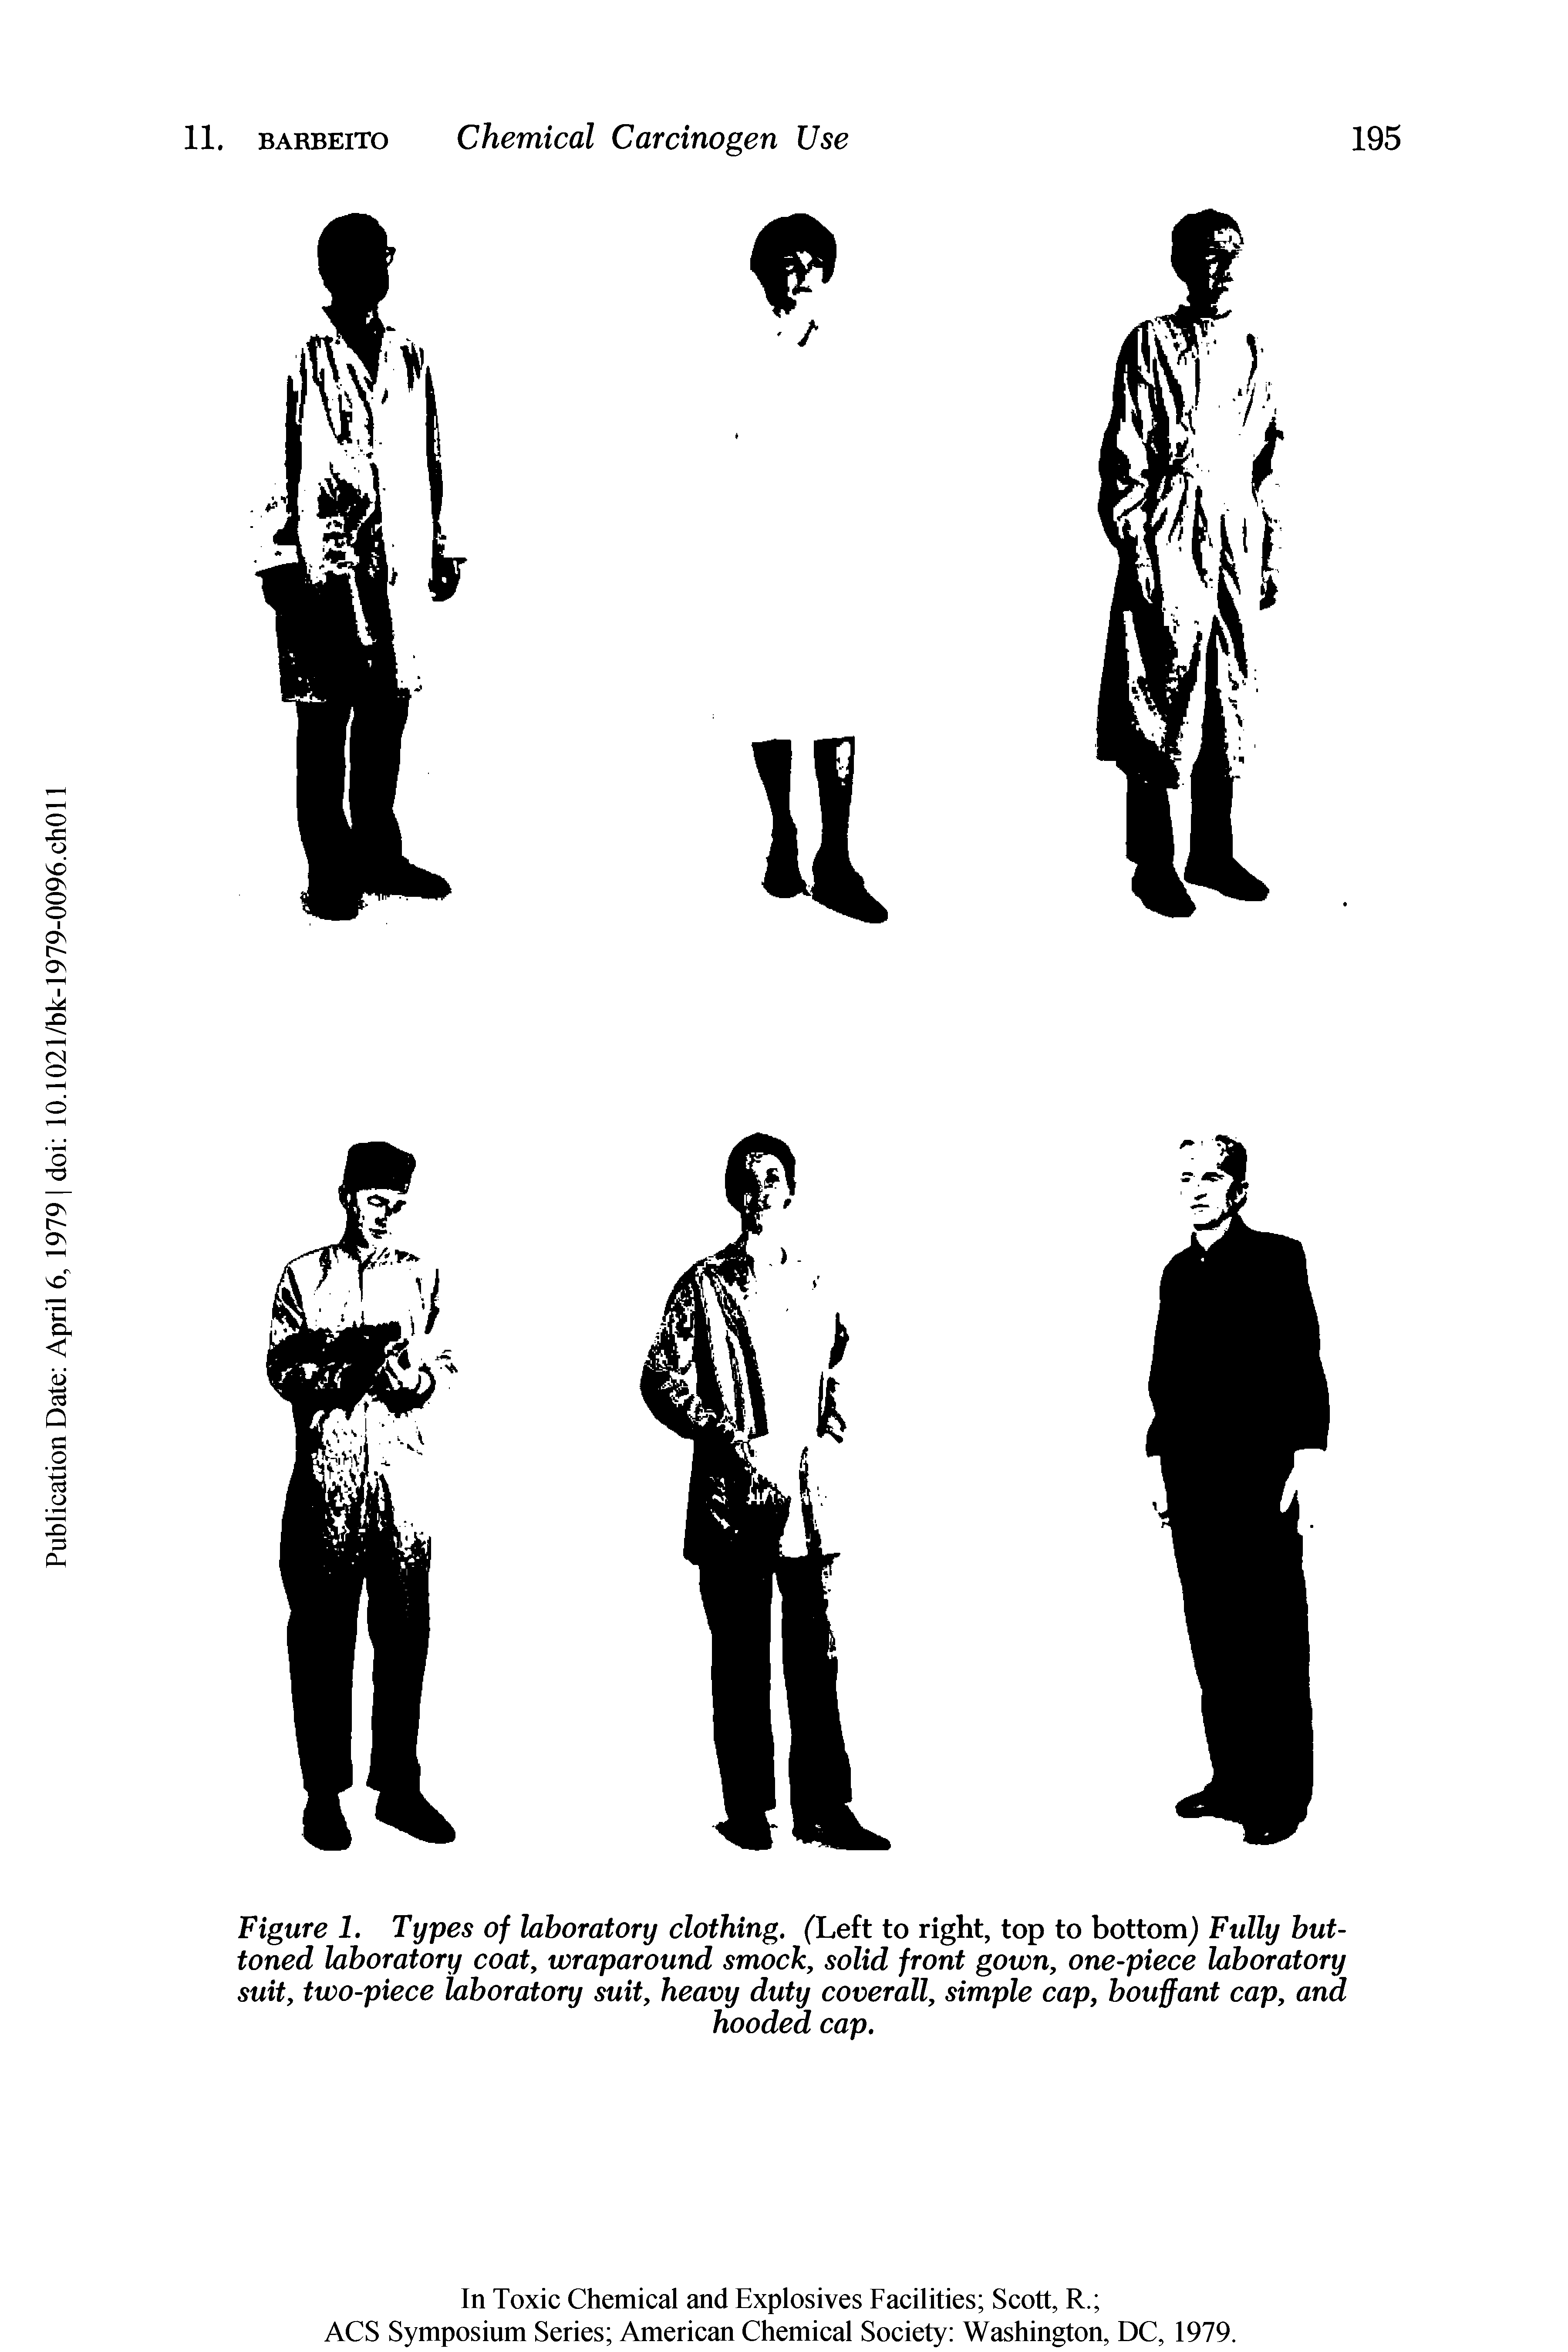 Figure 1. Types of laboratory clothing. (Left to right, top to bottom) Fully buttoned laboratory coat, wraparound smock, solid front gown, one-piece laboratory suit, two-piece laboratory suit, heavy duty coverall, simple cap, bouffant cap, and...